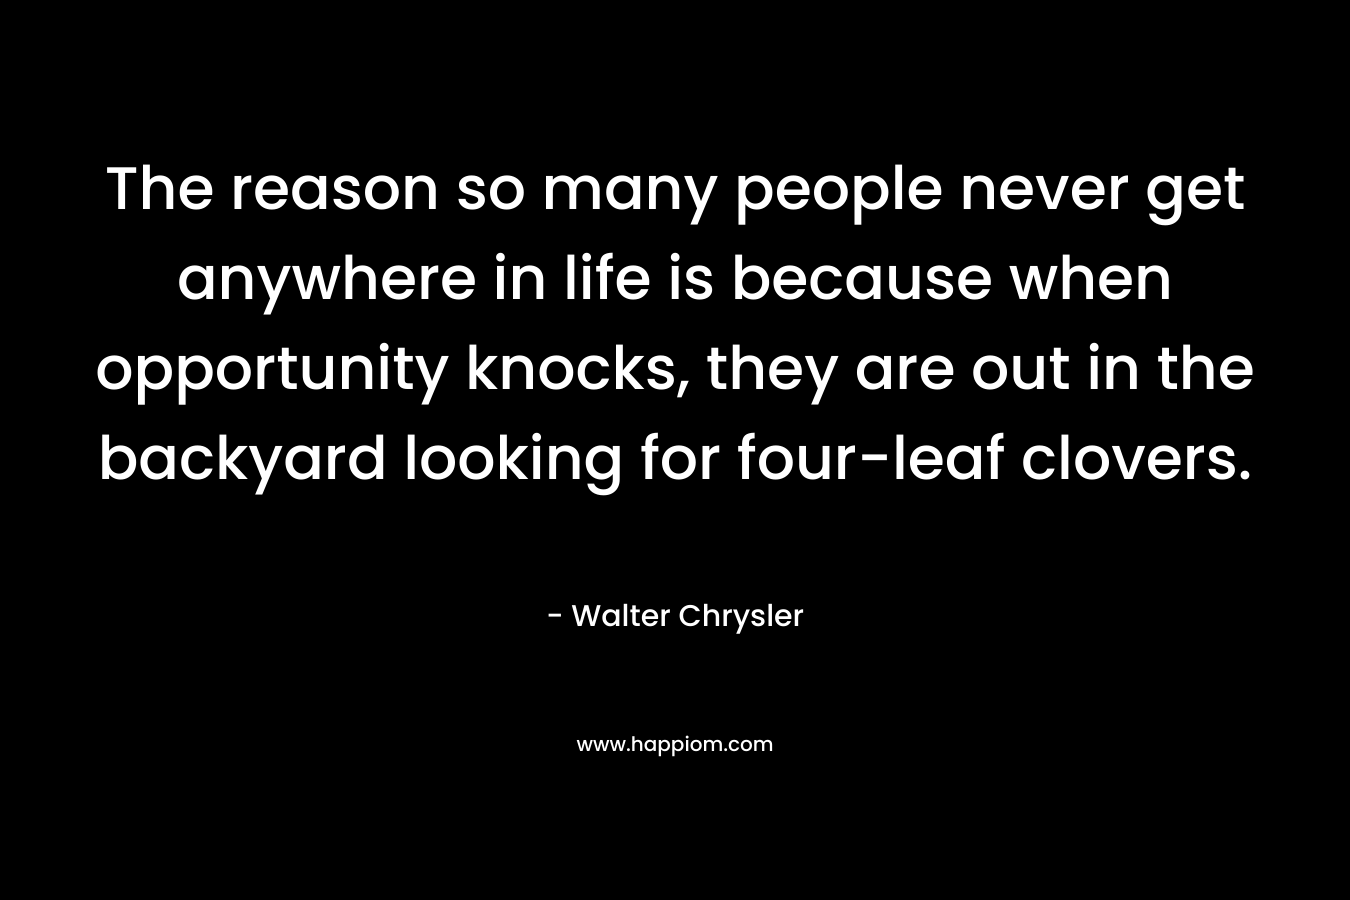 The reason so many people never get anywhere in life is because when opportunity knocks, they are out in the backyard looking for four-leaf clovers.